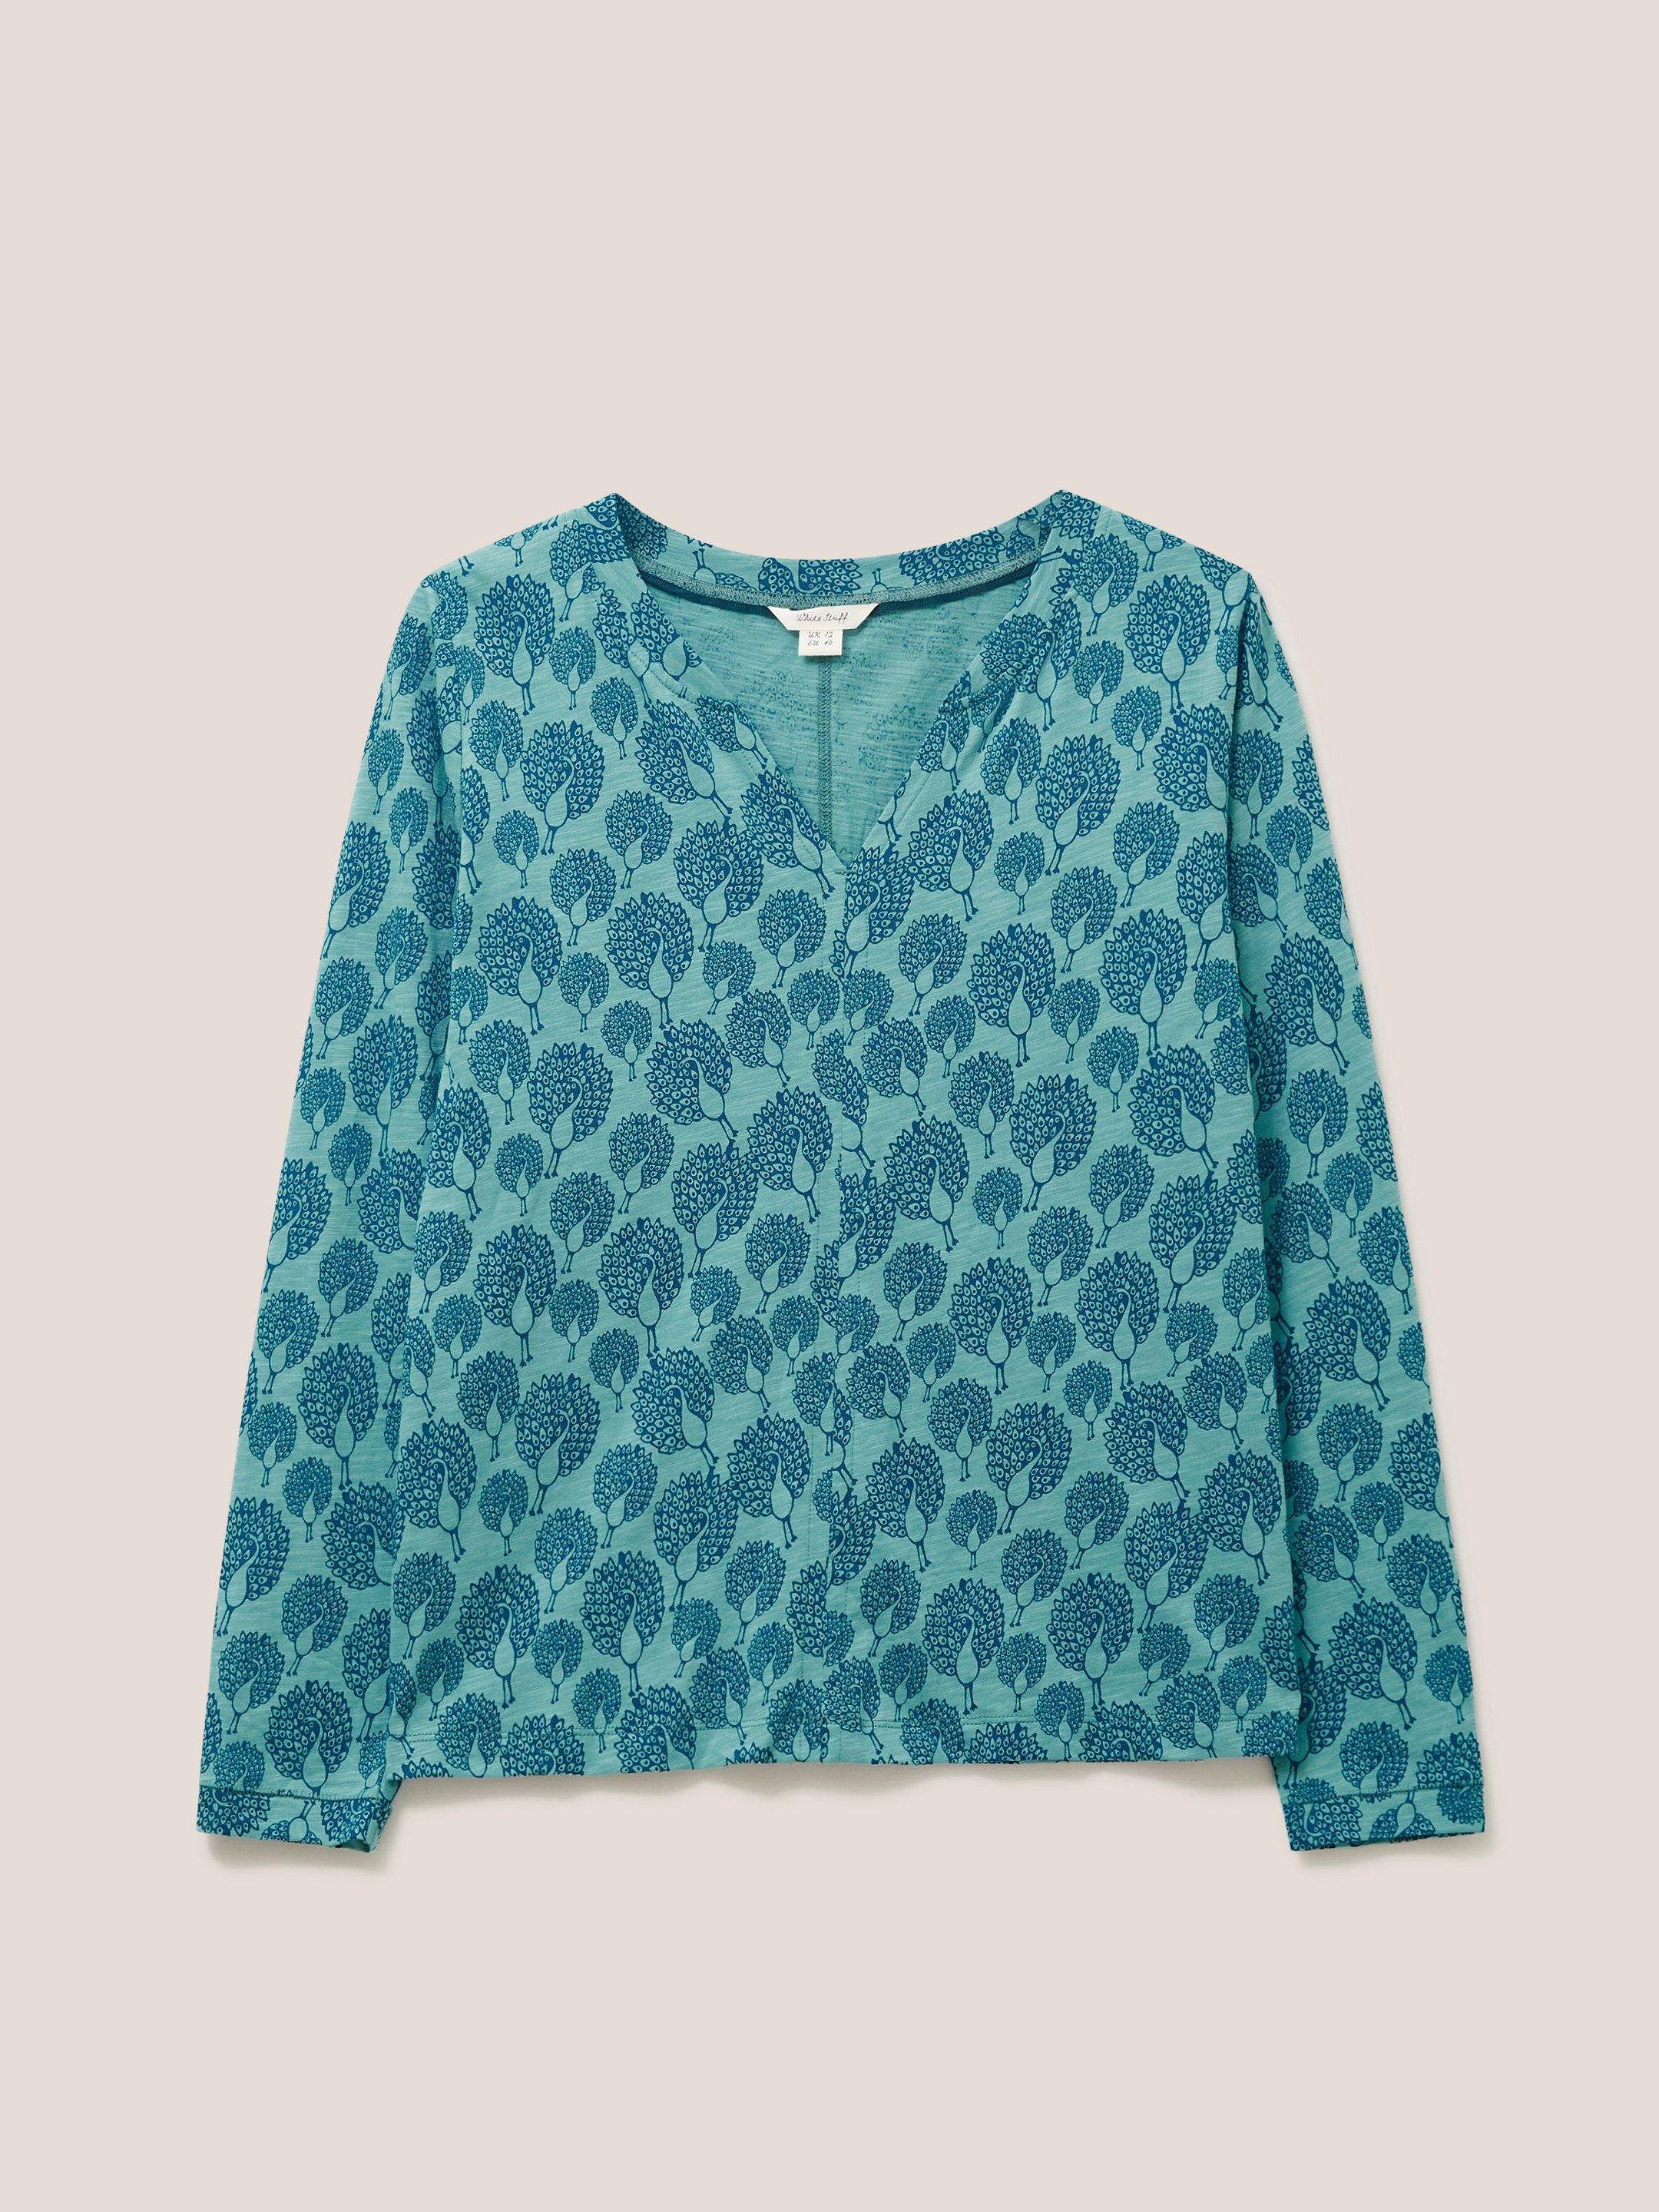 Long Sleeve Nelly Tee in TEAL PR - FLAT FRONT